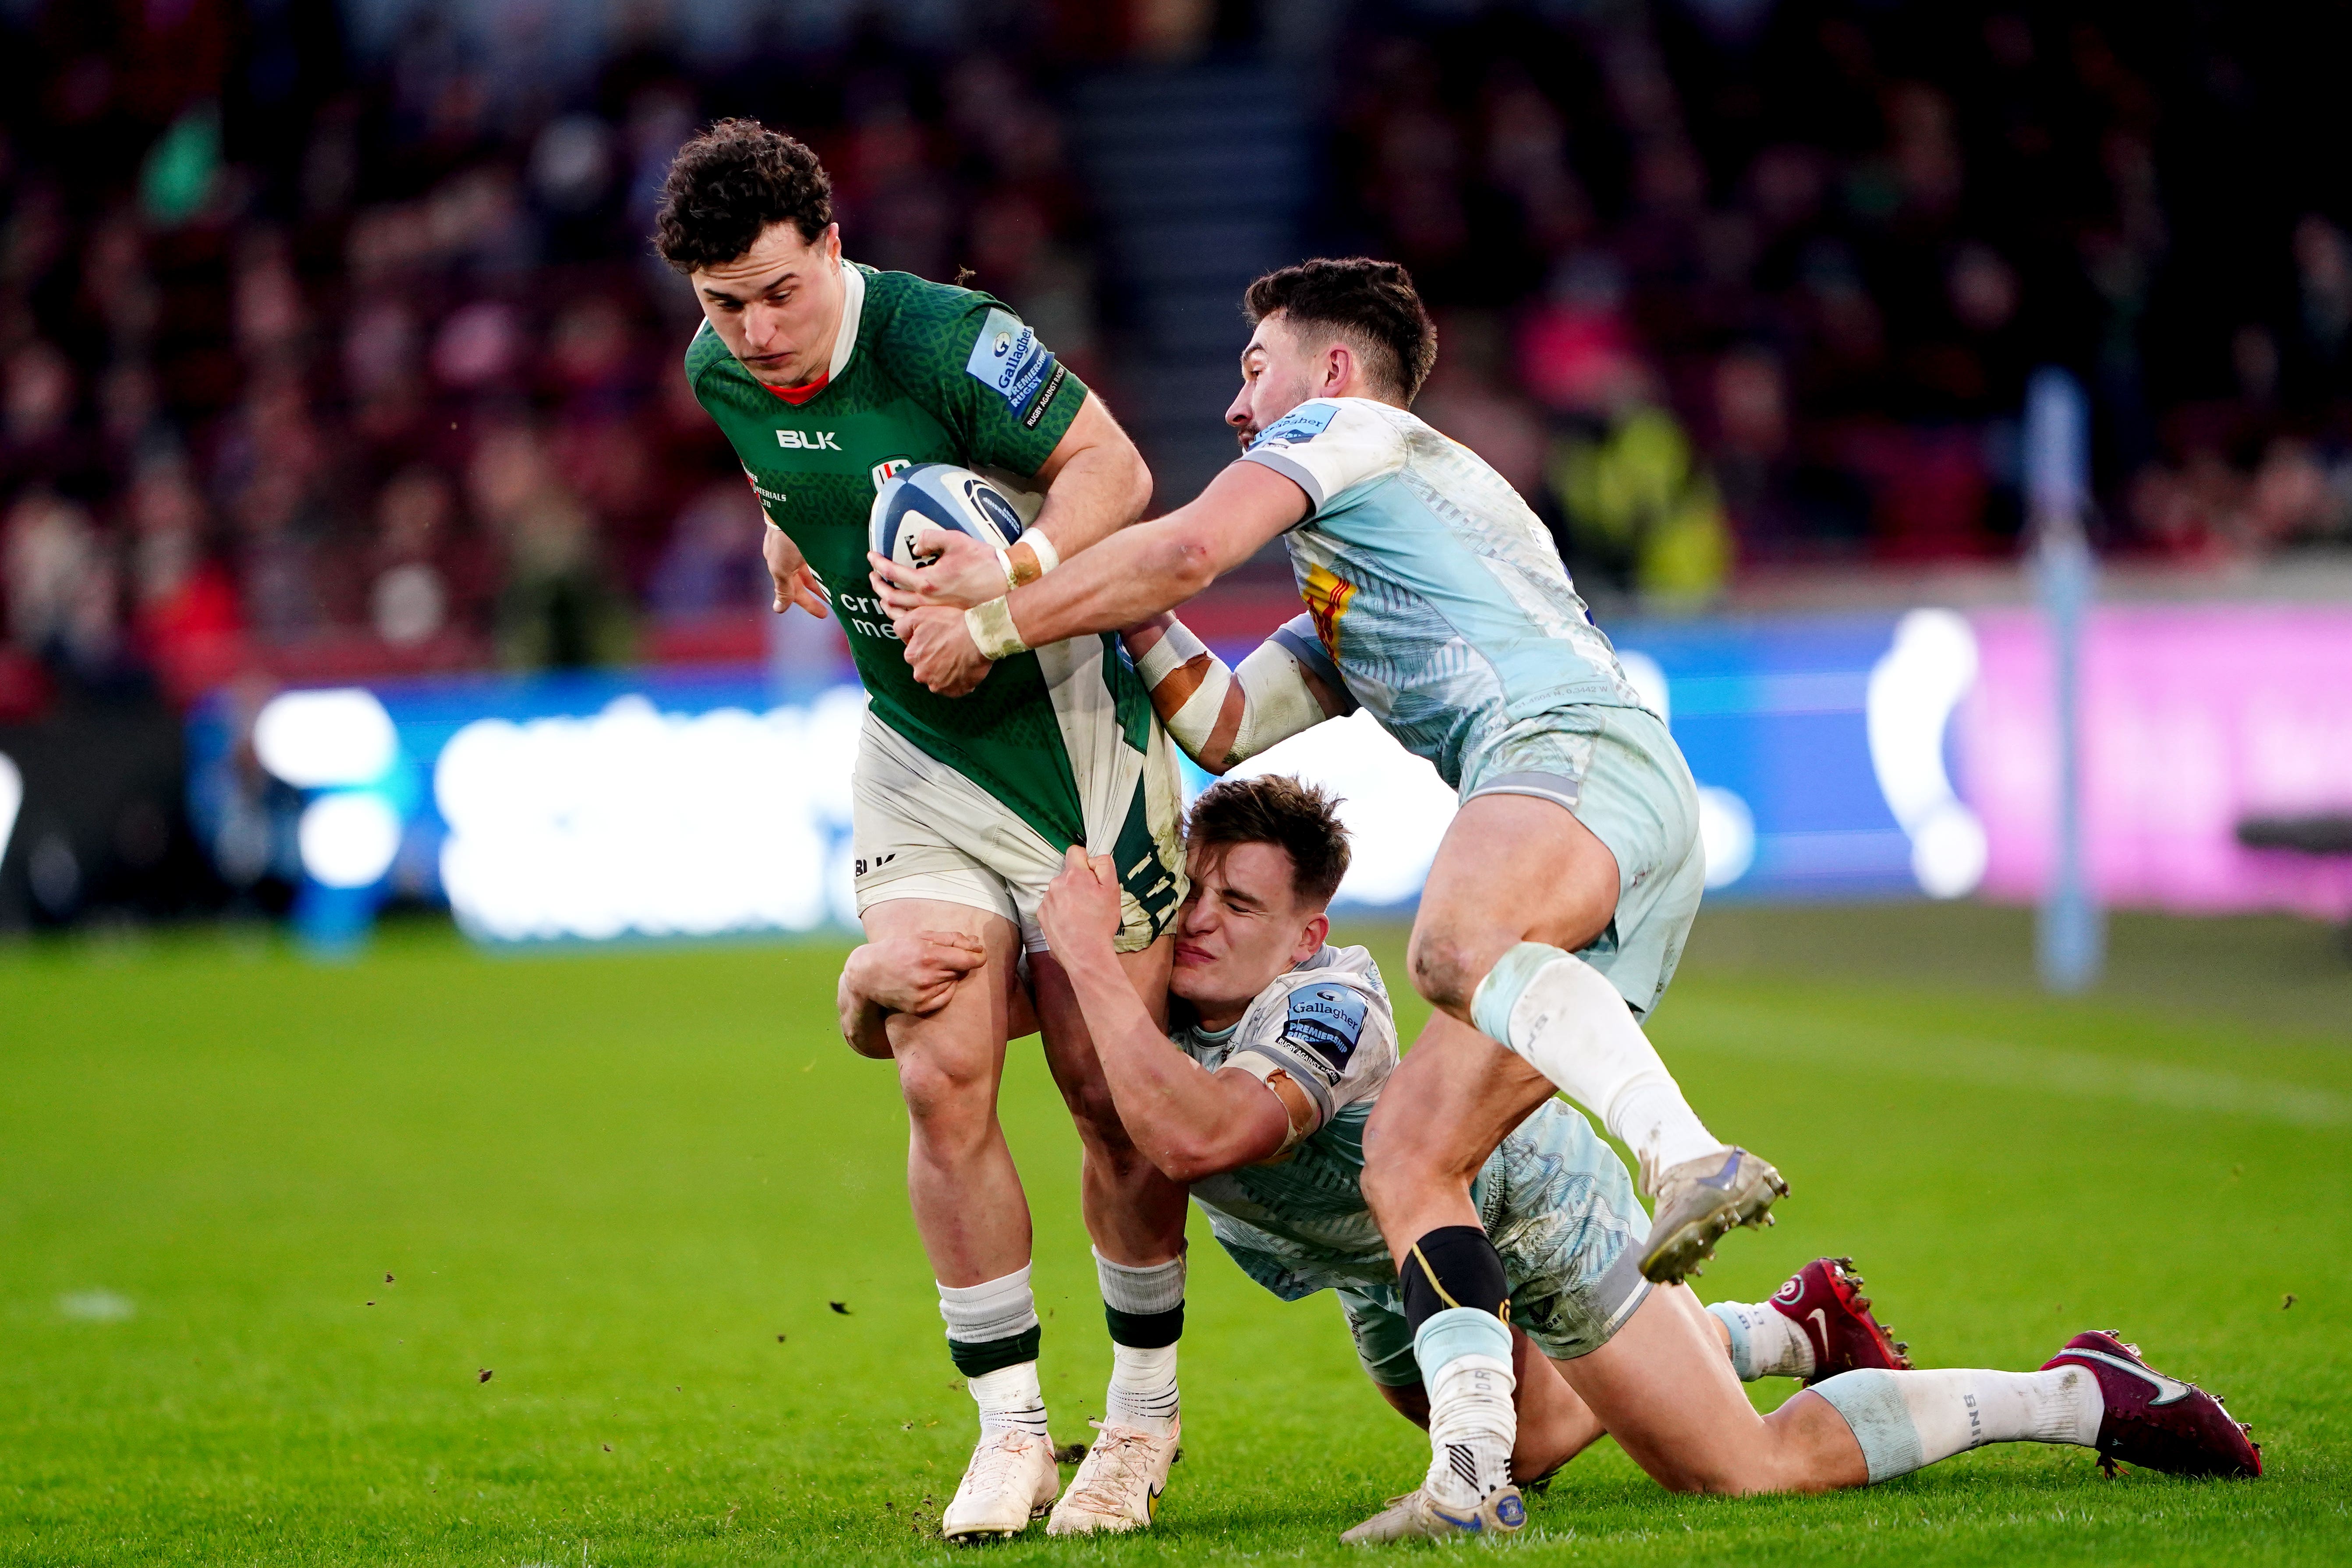 London Irish had an impressive season on the pitch but have lurched into off-field disaster